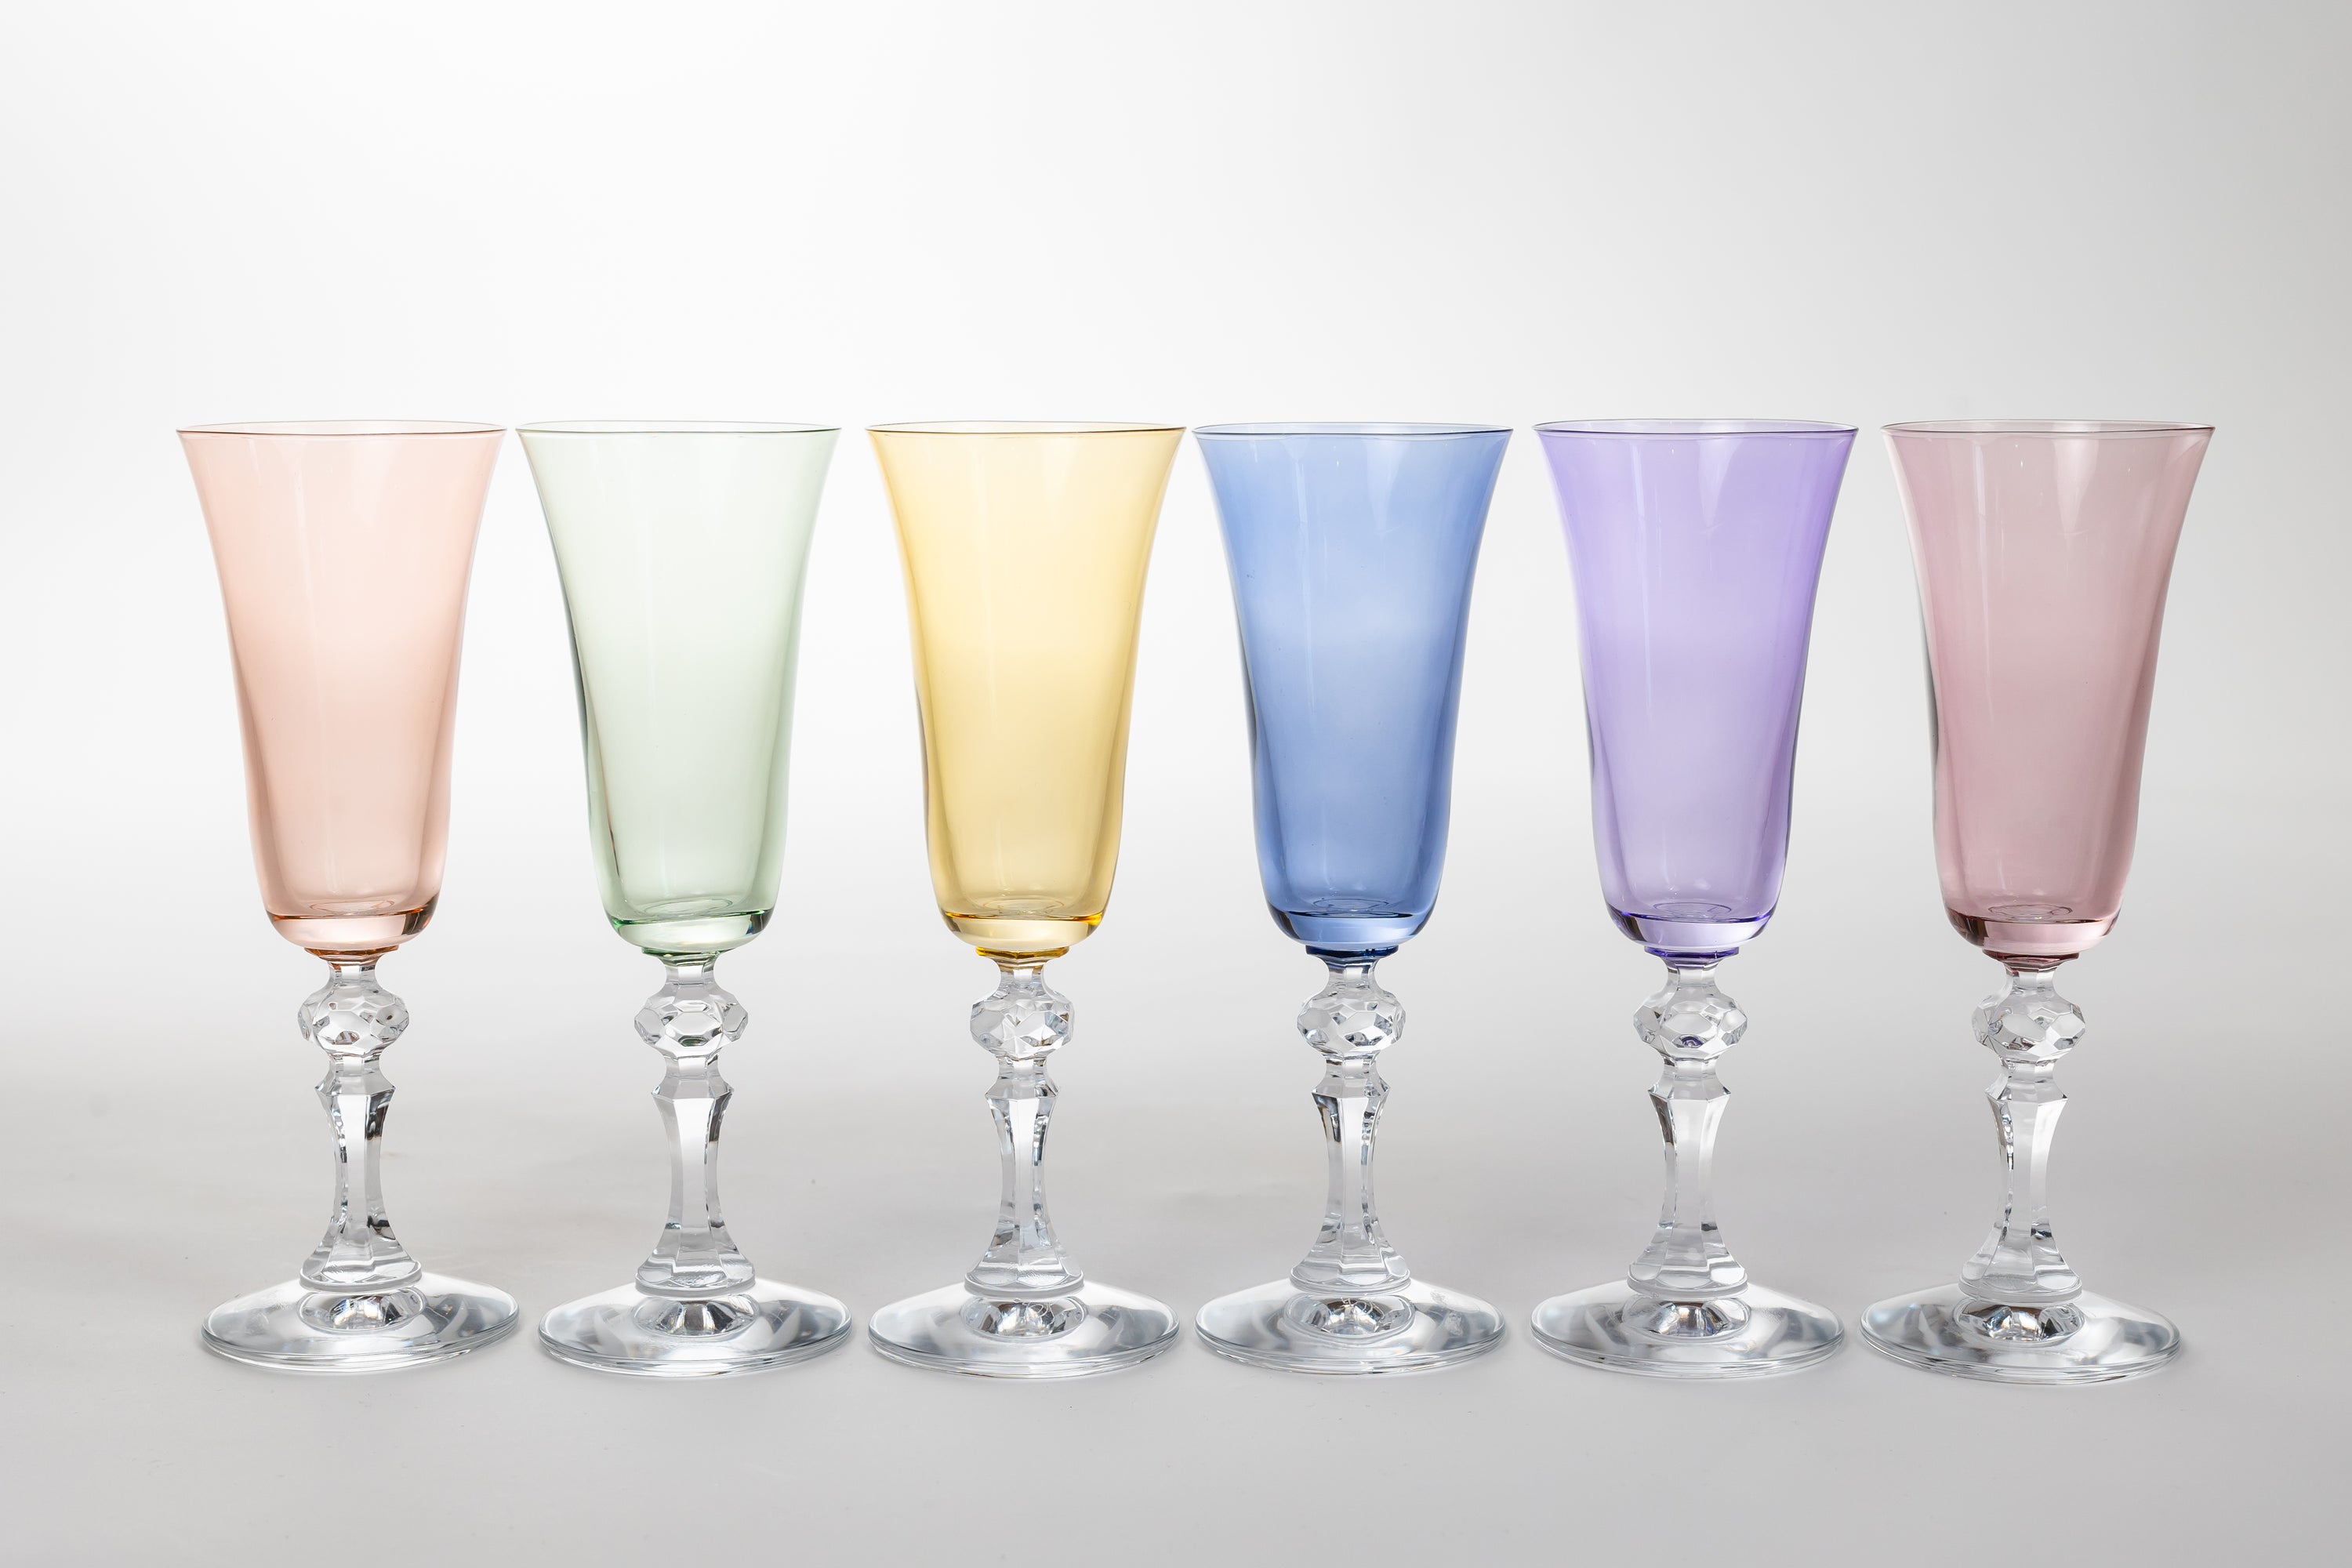 New Limited Edition: Regal Flutes With Clear Stems